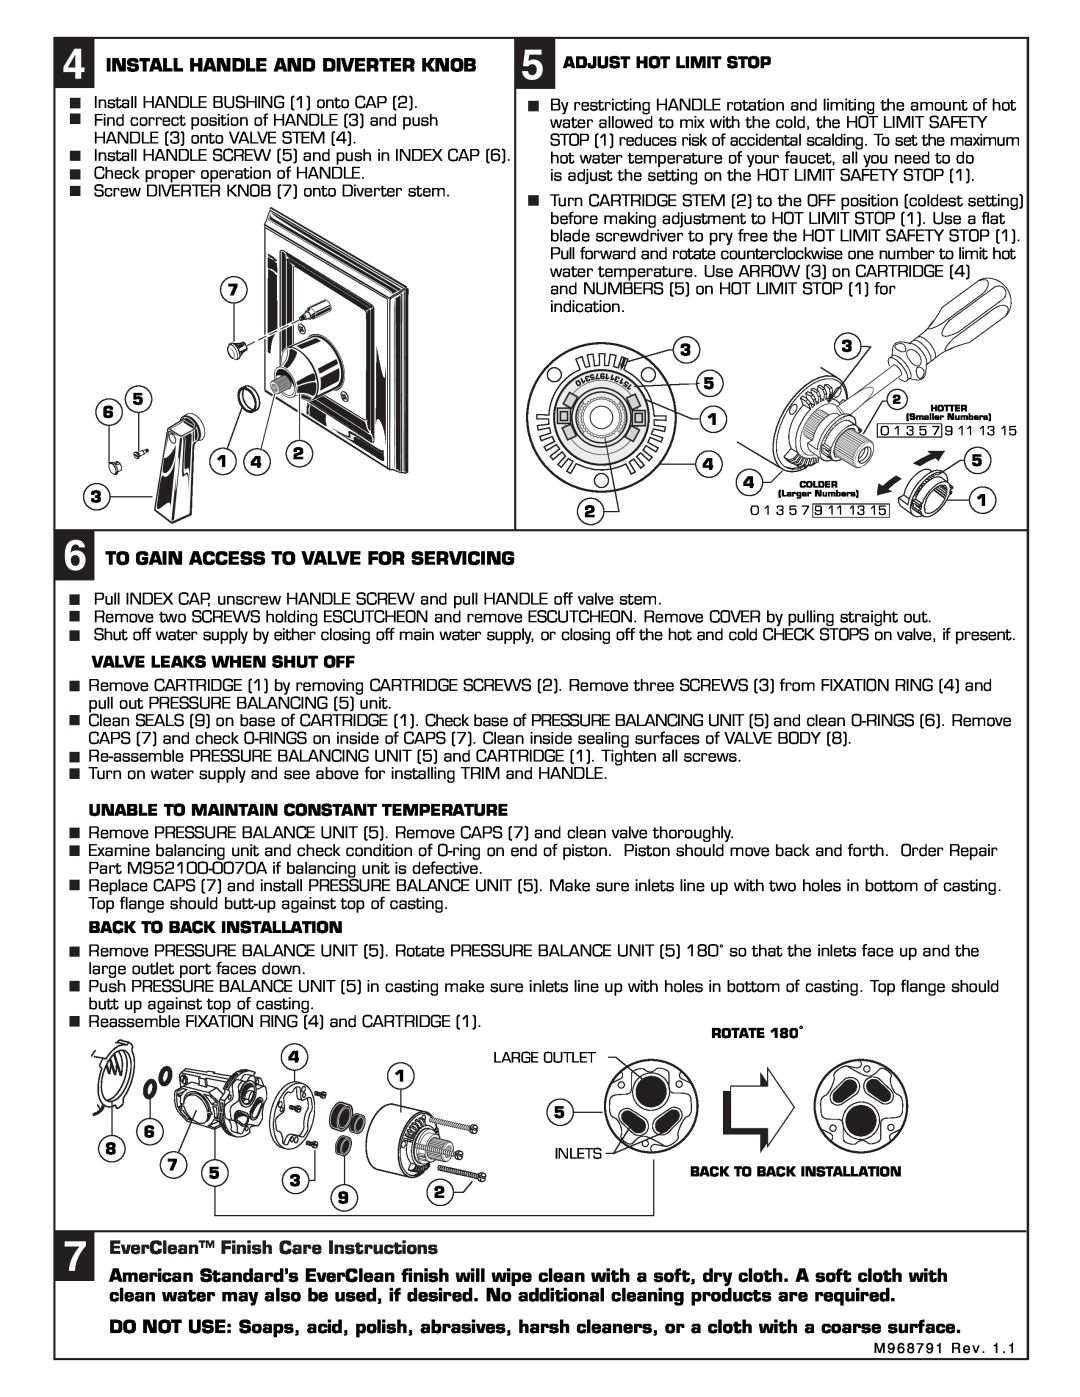 American Standard 2555.652 installation instructions Install Handle And Diverter Knob, EverClean Finish Care Instructions 